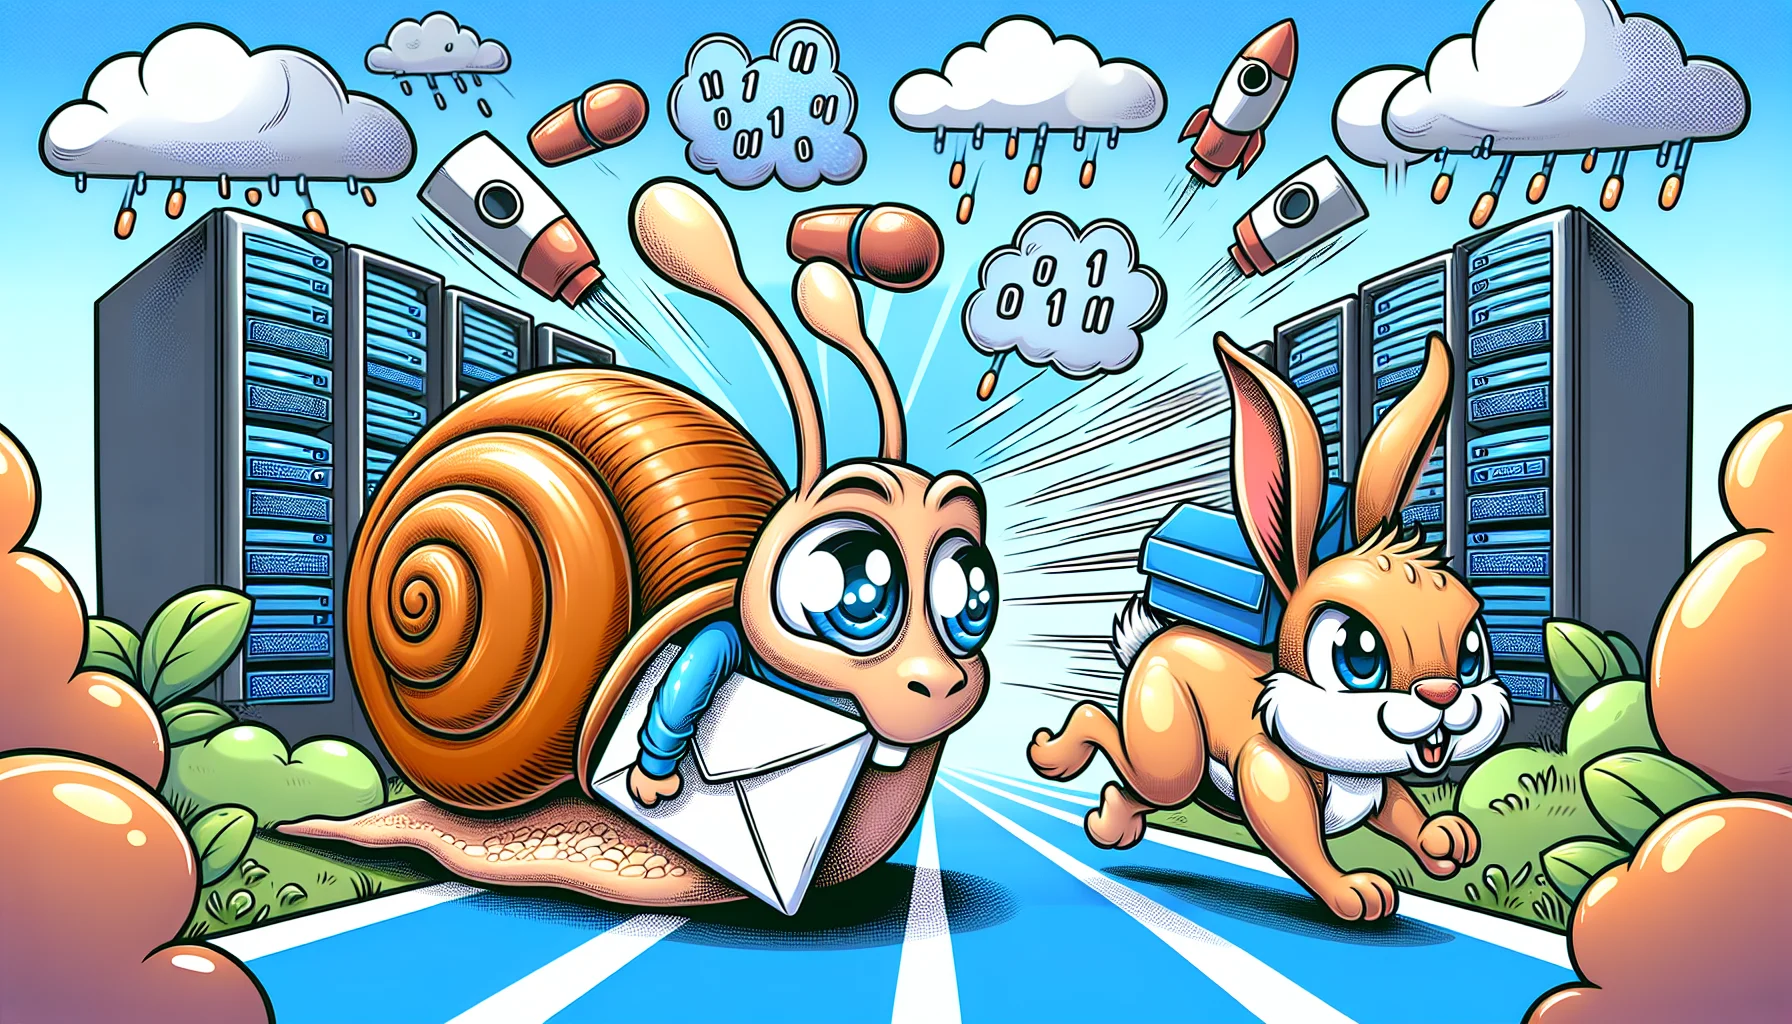 Create a comic-style illustration that humorously showcases an email hosting service, captured through an enticing web hosting scenario. Imagine a mascotted snail carrying a large envelope, symbolizing email, racing against a hare that symbolizes high-speed internet. The background is filled with vivid representations of web hosting: stylized servers, cloud symbols, and binary code rain. Mischievous and curious expressions mark the faces of snail and hare, creating a playful learning atmosphere about the importance of email hosting in the world of web hosting.